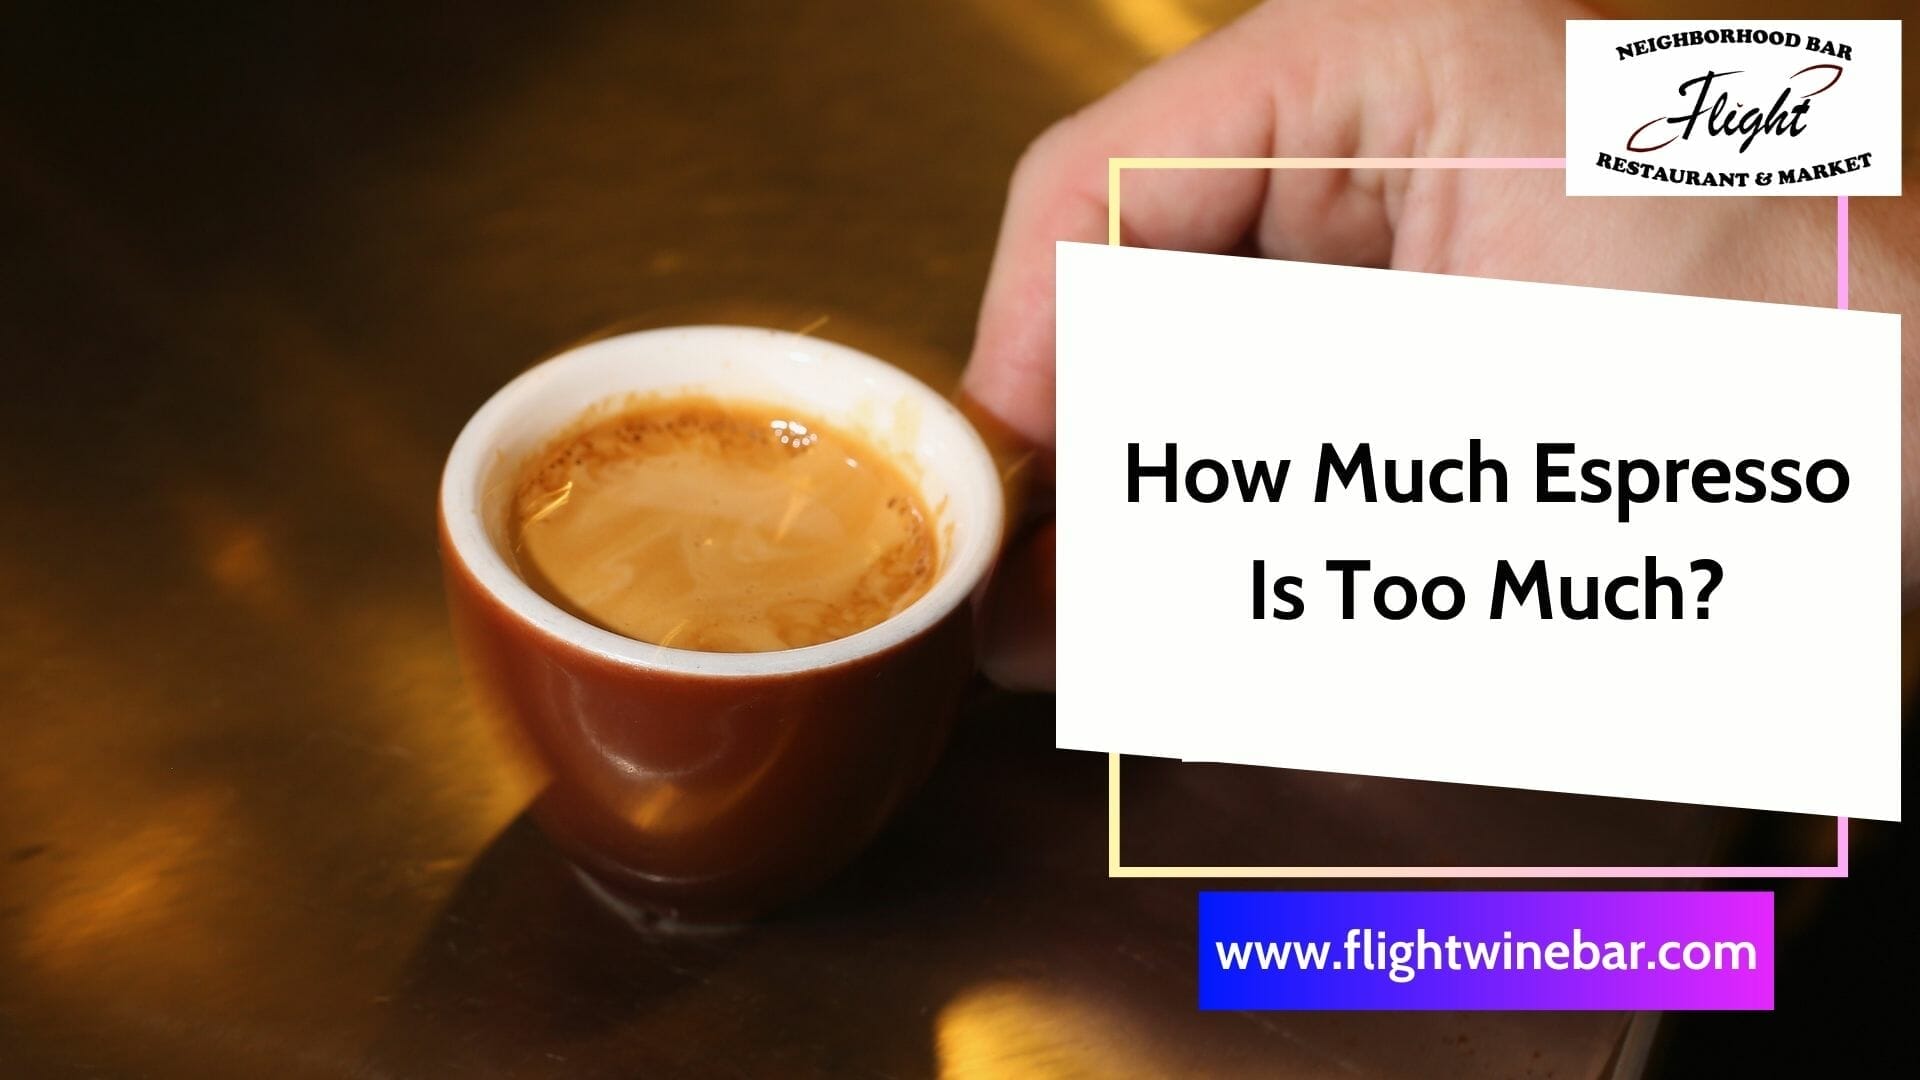 How Much Espresso Is Too Much